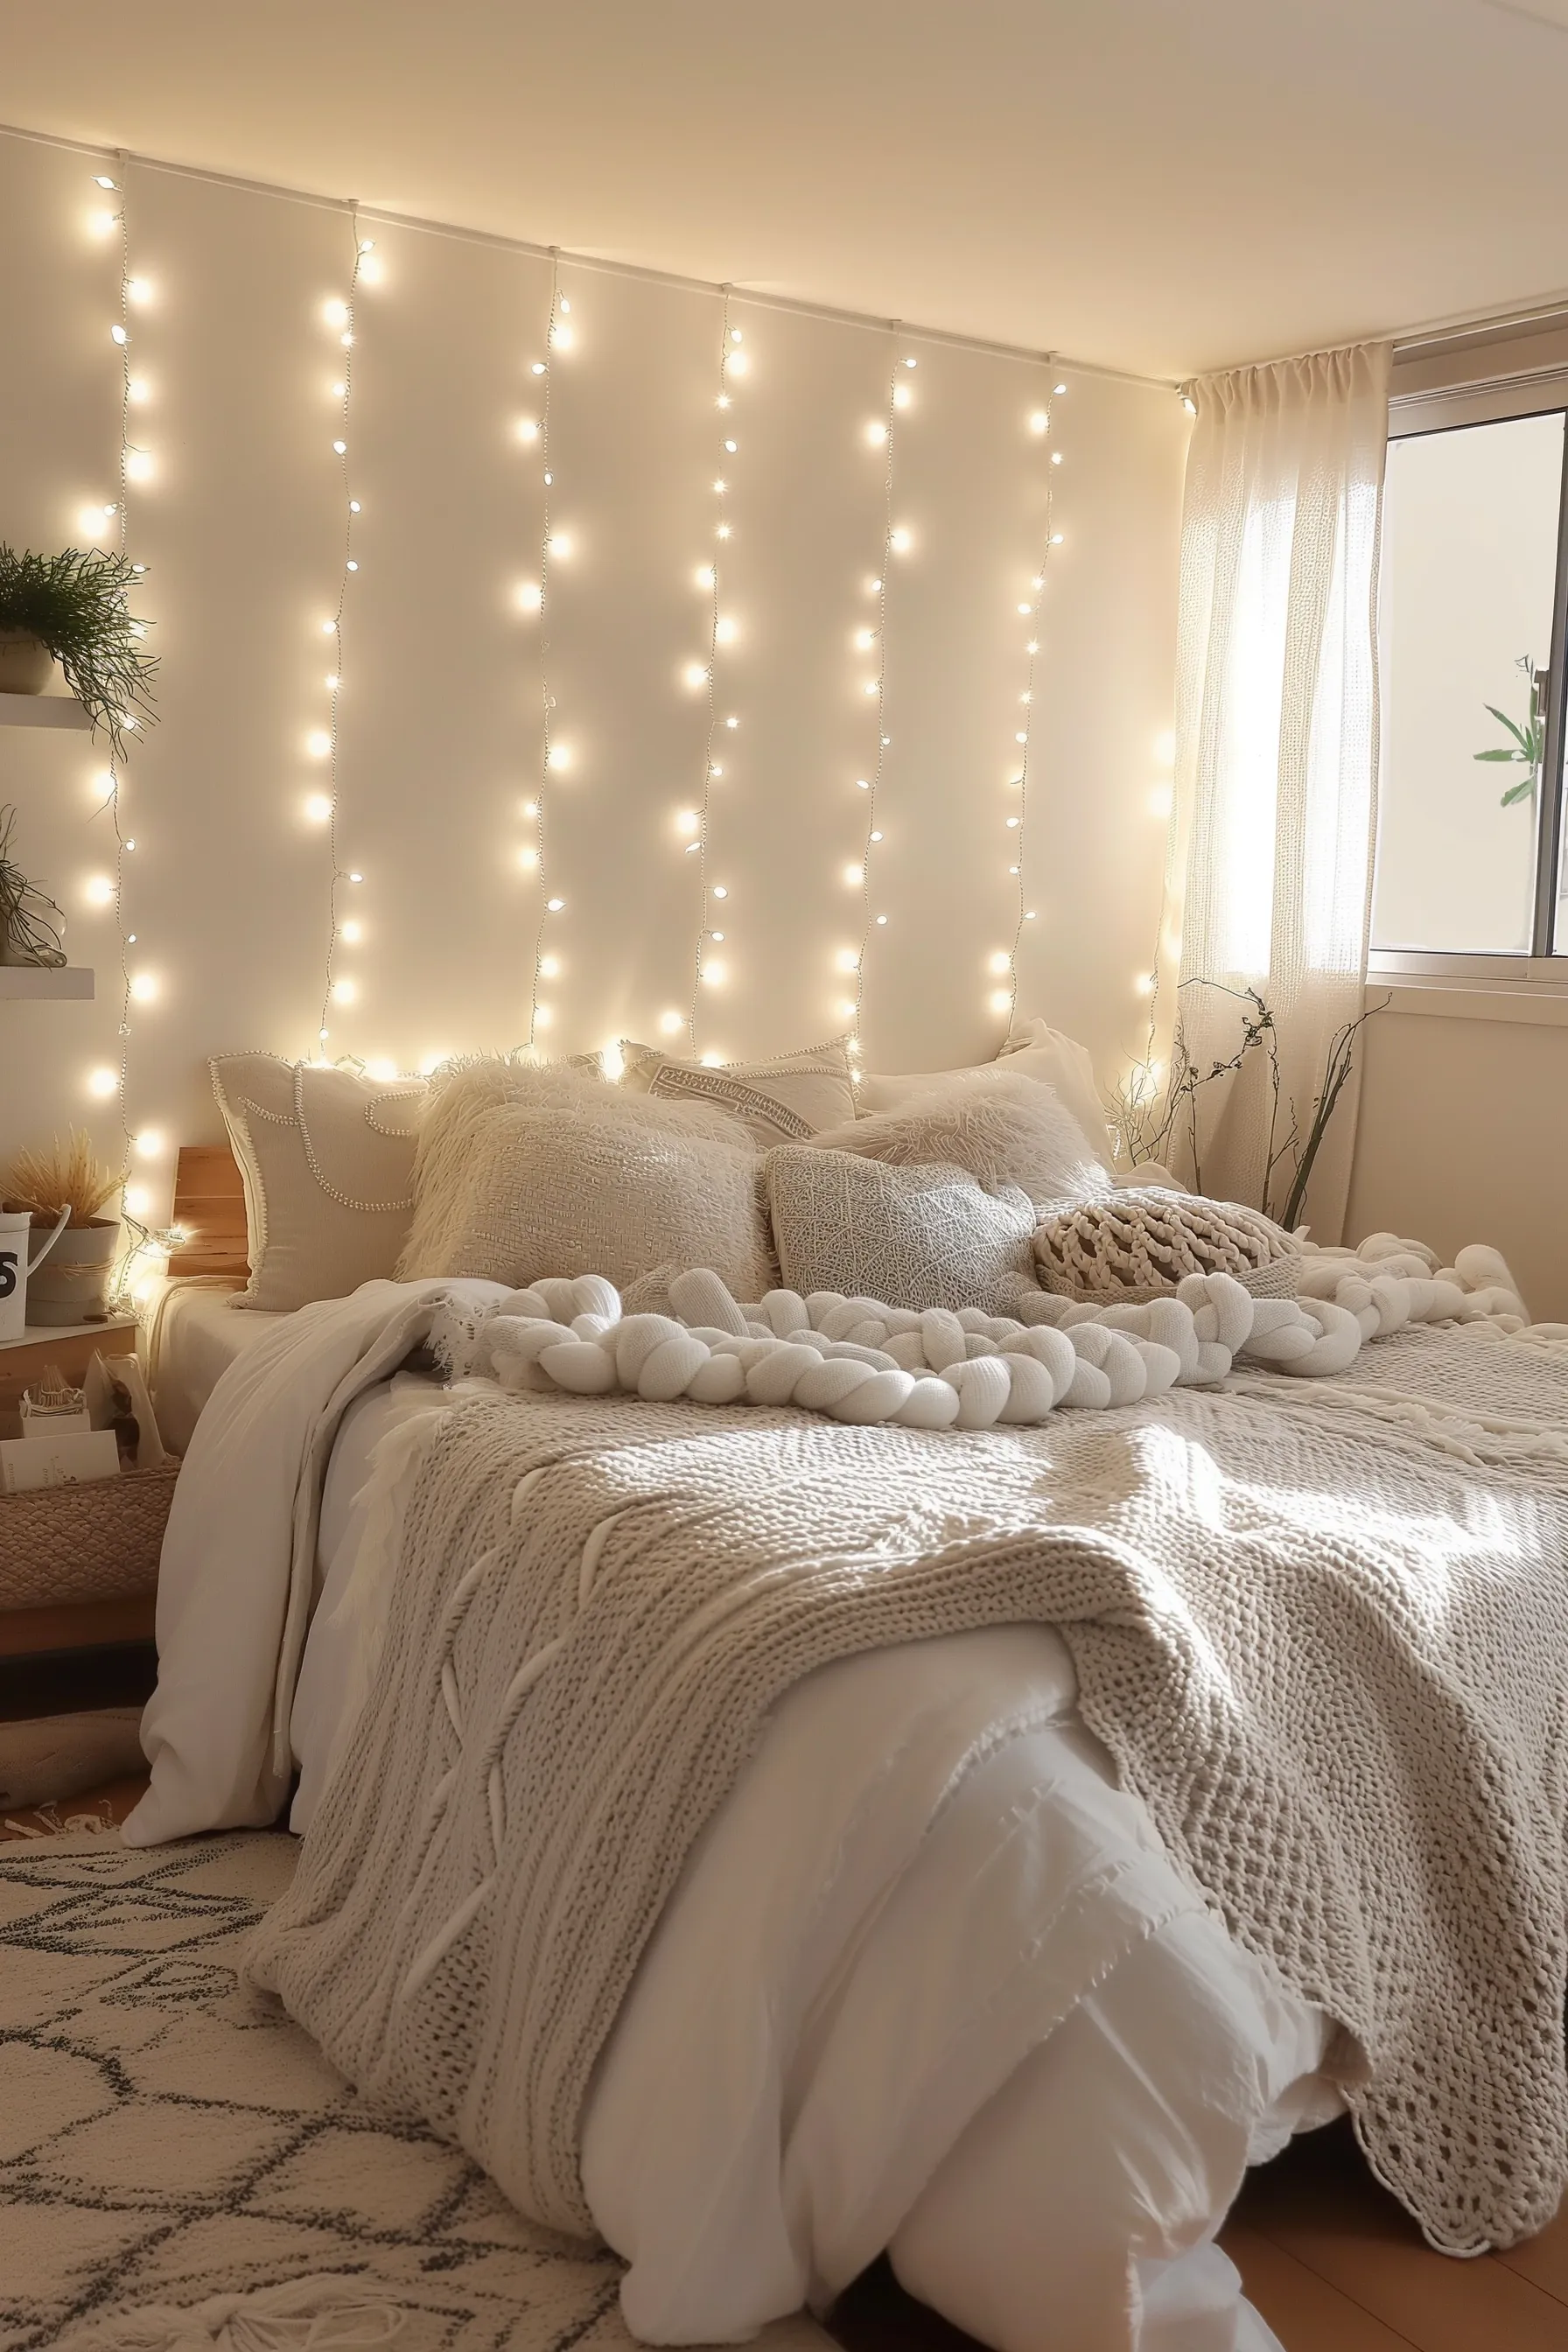 Fairy lights draping down a white dorm room